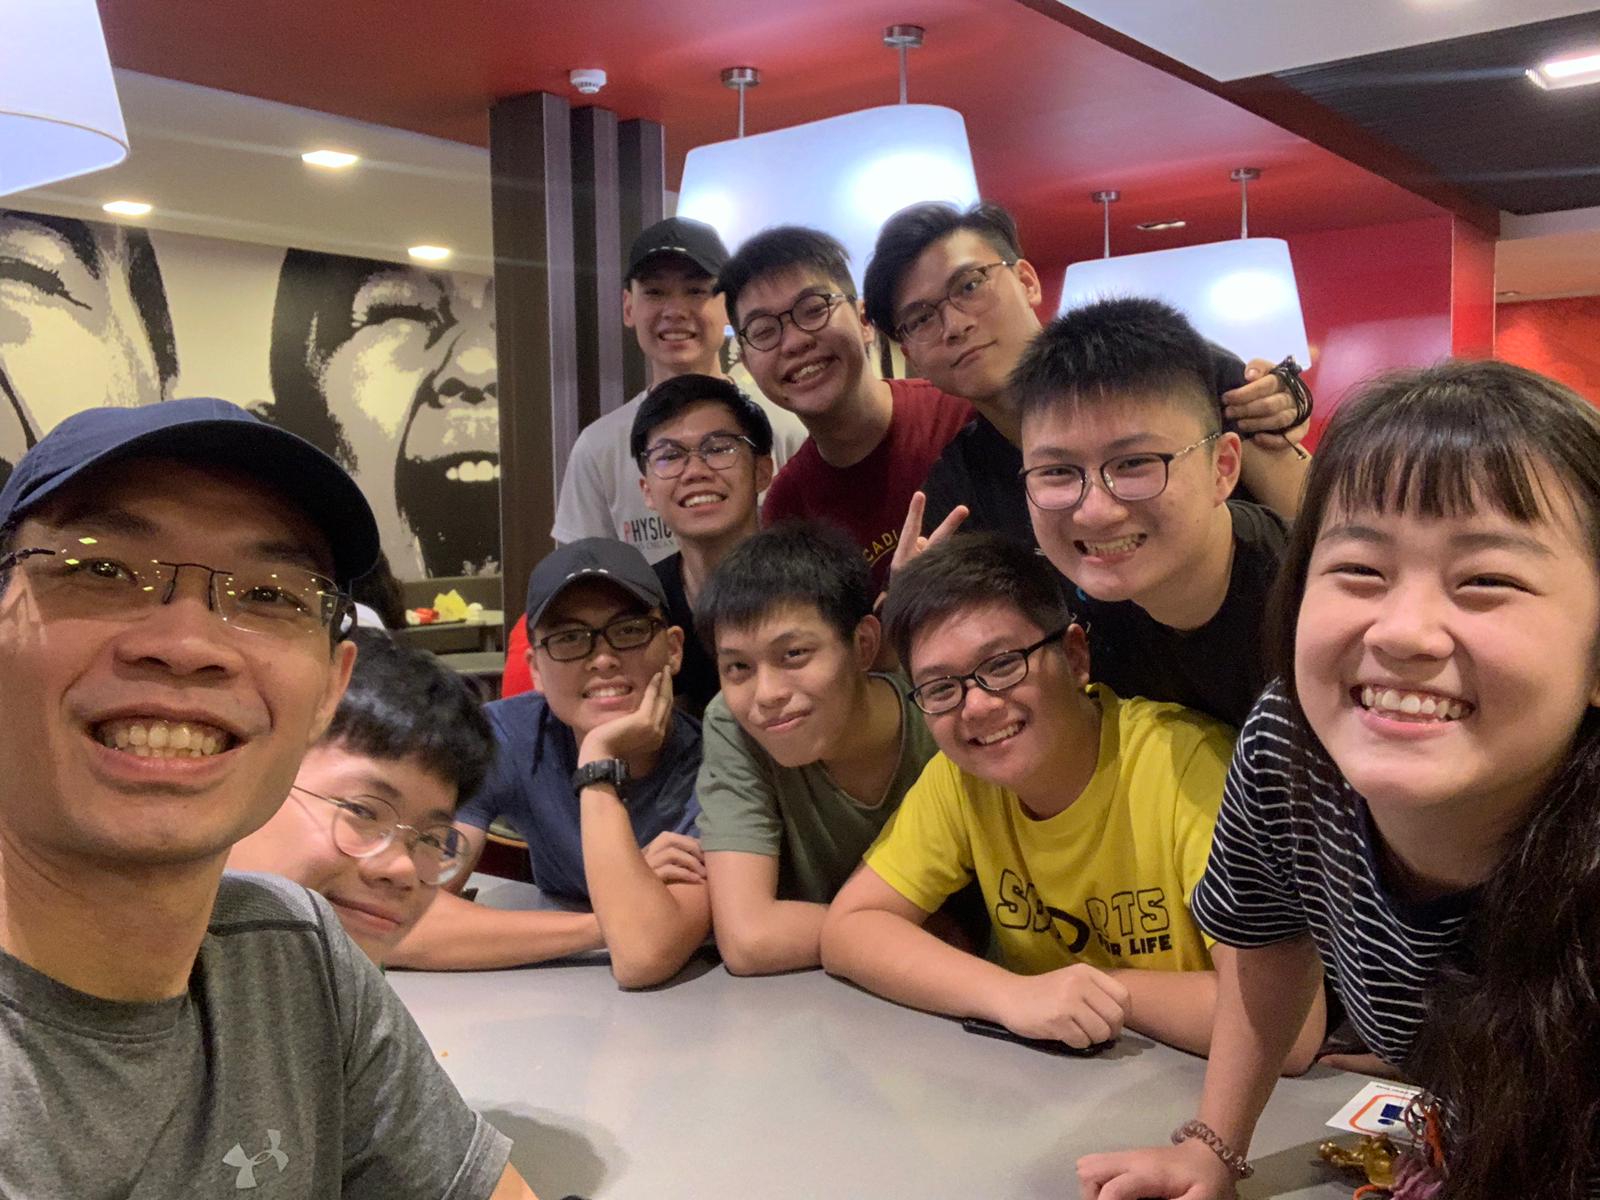 group photo of my npcc squad in macdonalds during our monthly meet up